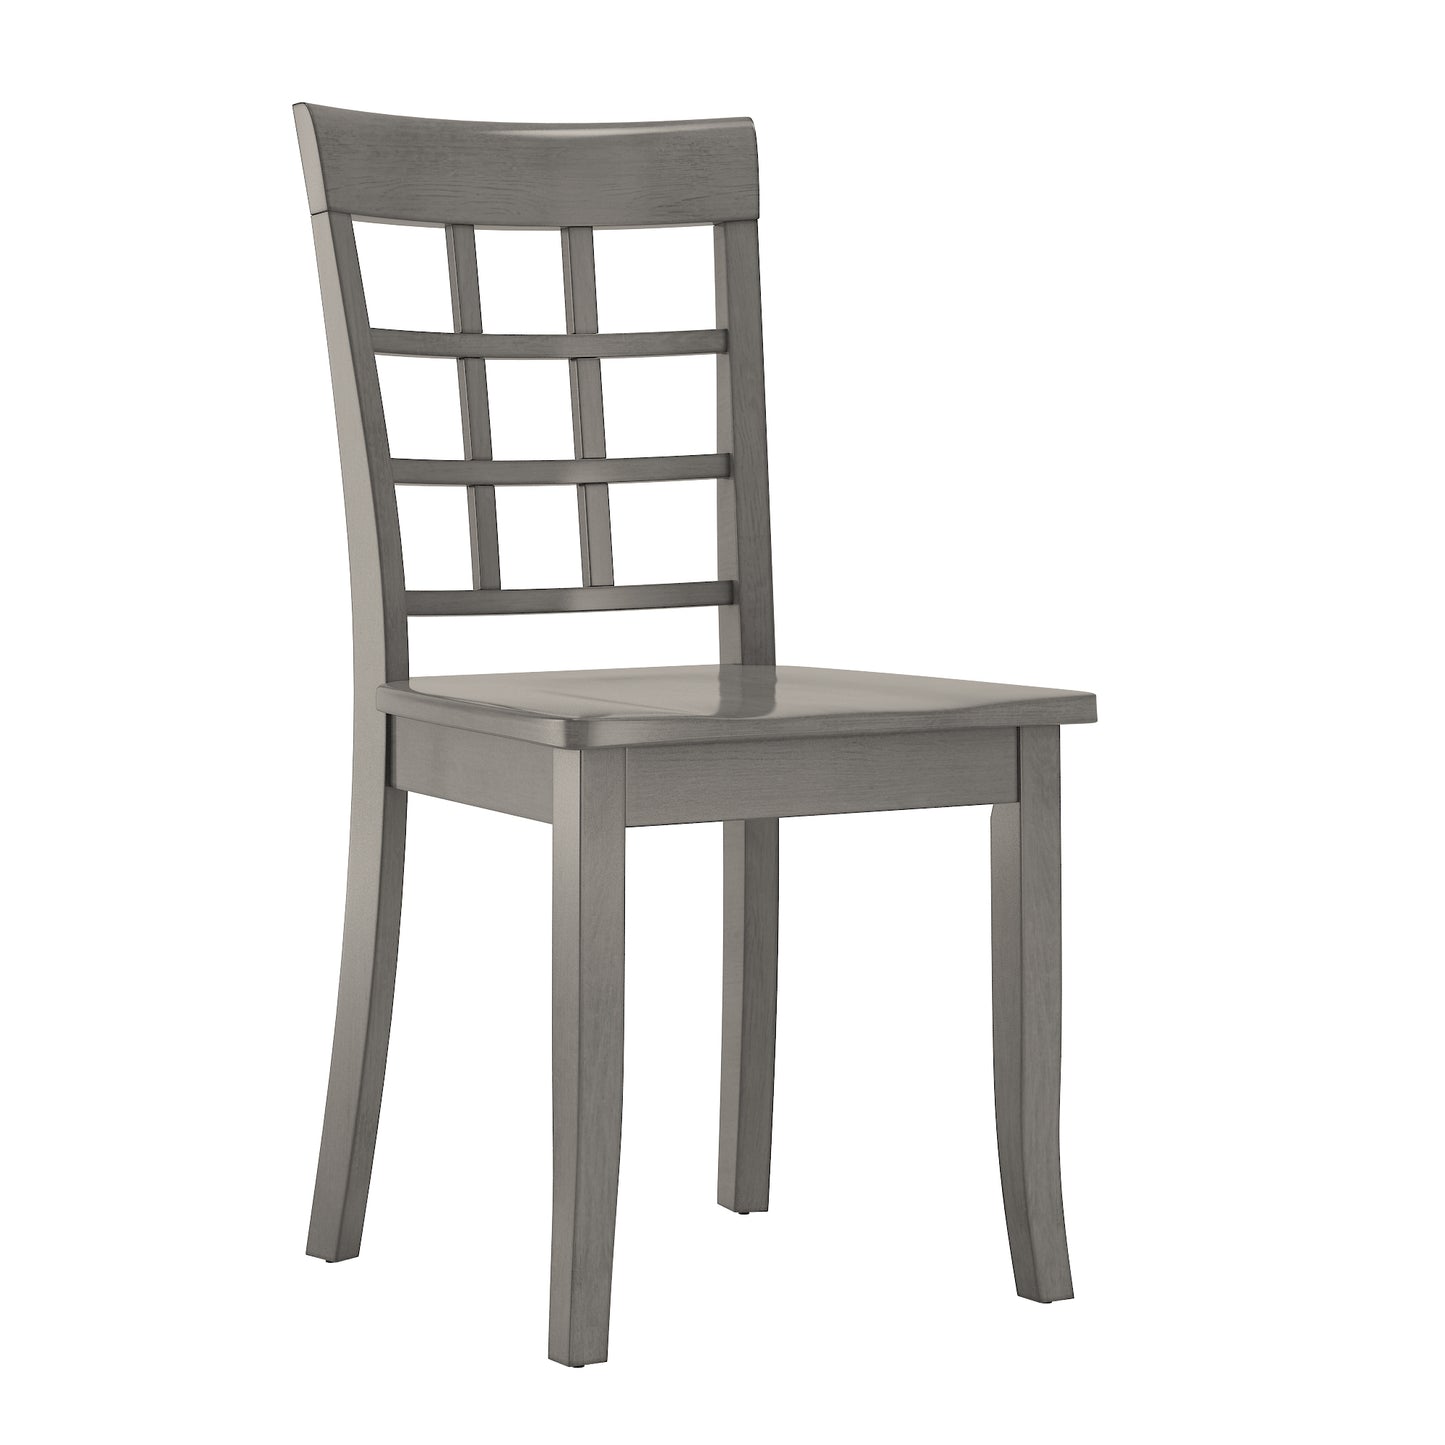 Two-Tone Round 5-Piece Dining Set - Antique Grey Finish, Window Back Chairs